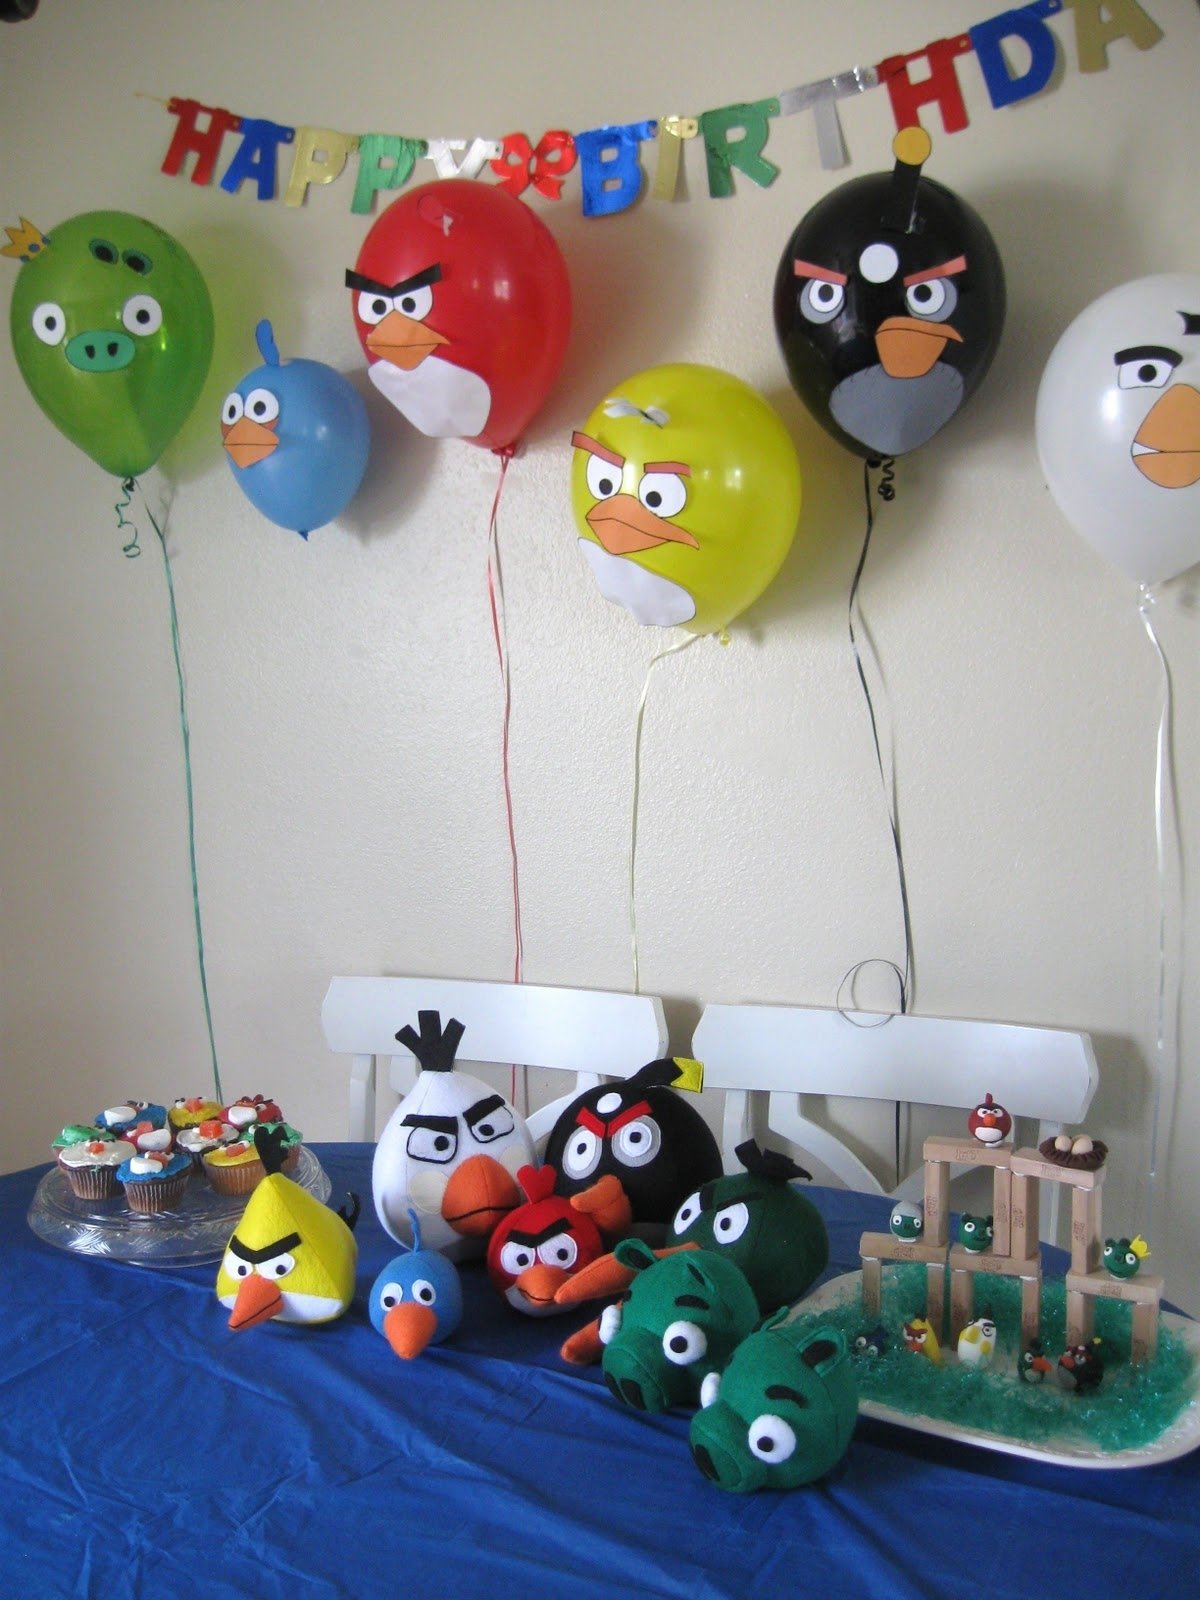 10 Awesome Birthday Ideas For A 5 Year Old Boy angry birds balloons jacks next birthday party idea ideas for 1 2023